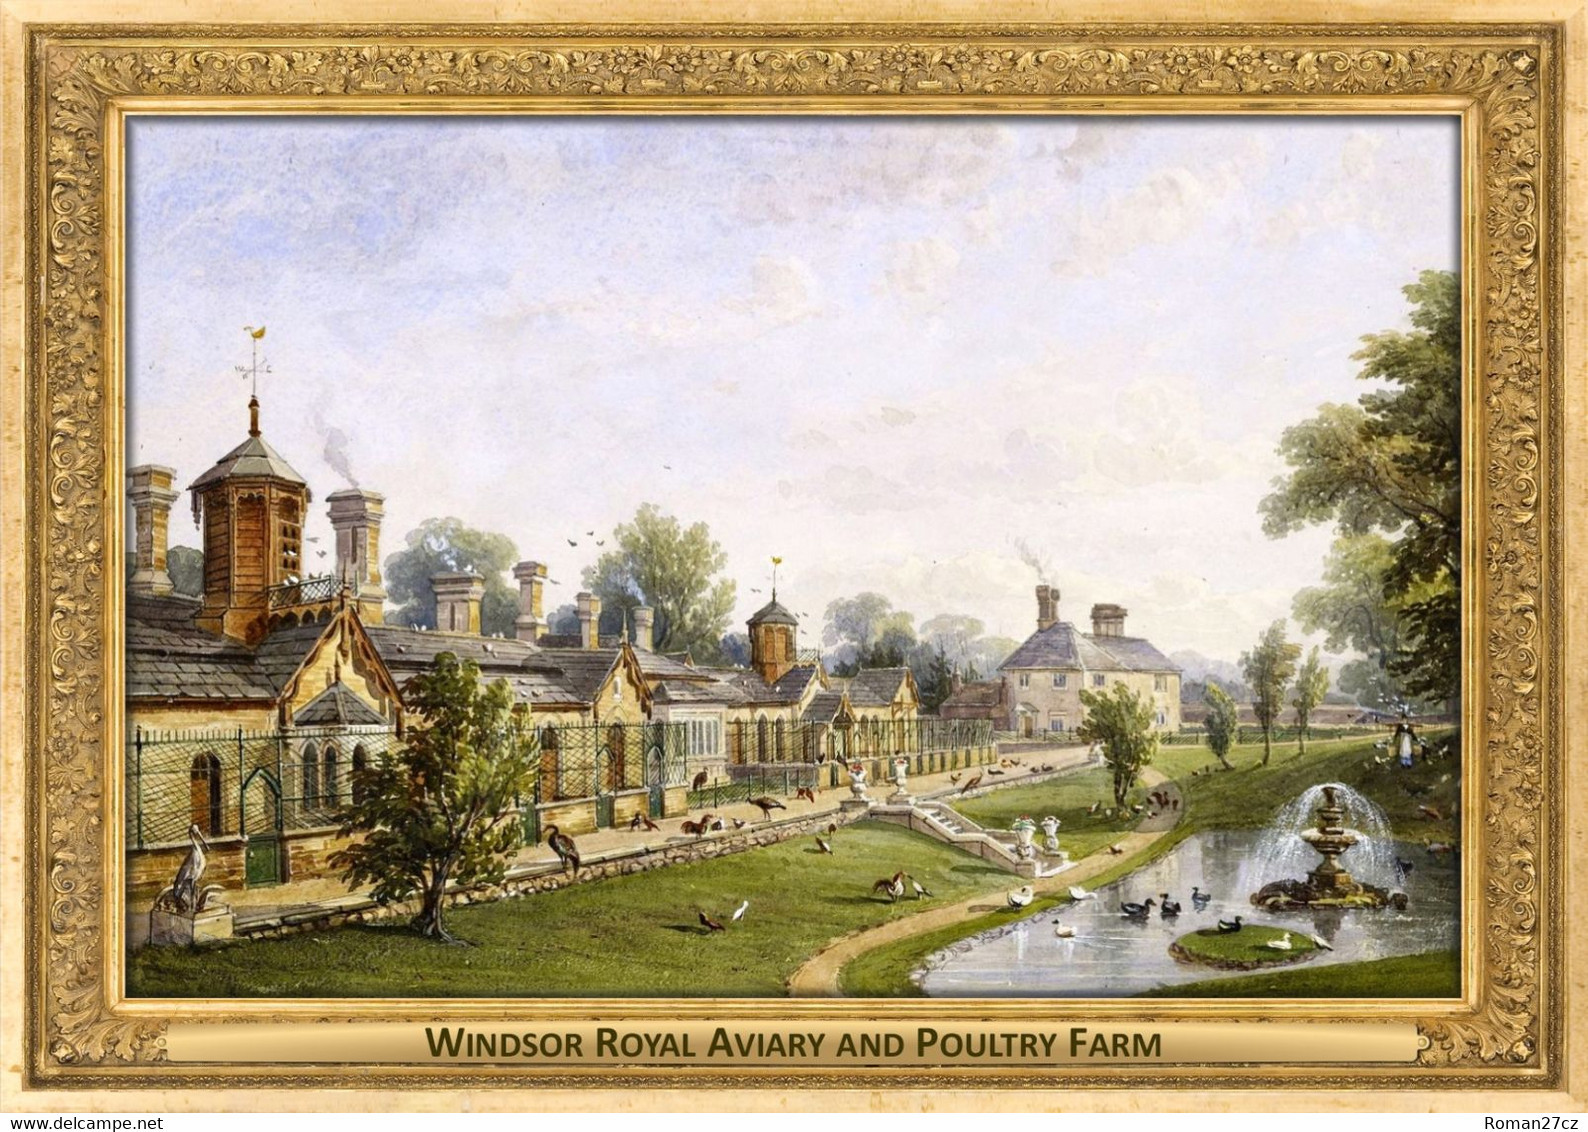 M100 Windsor Royal Aviary And Poultry Farm, UK - Robert Stanley Caleb, 1845 - Aviaries, Waterfowl And Other Birds - Windsor